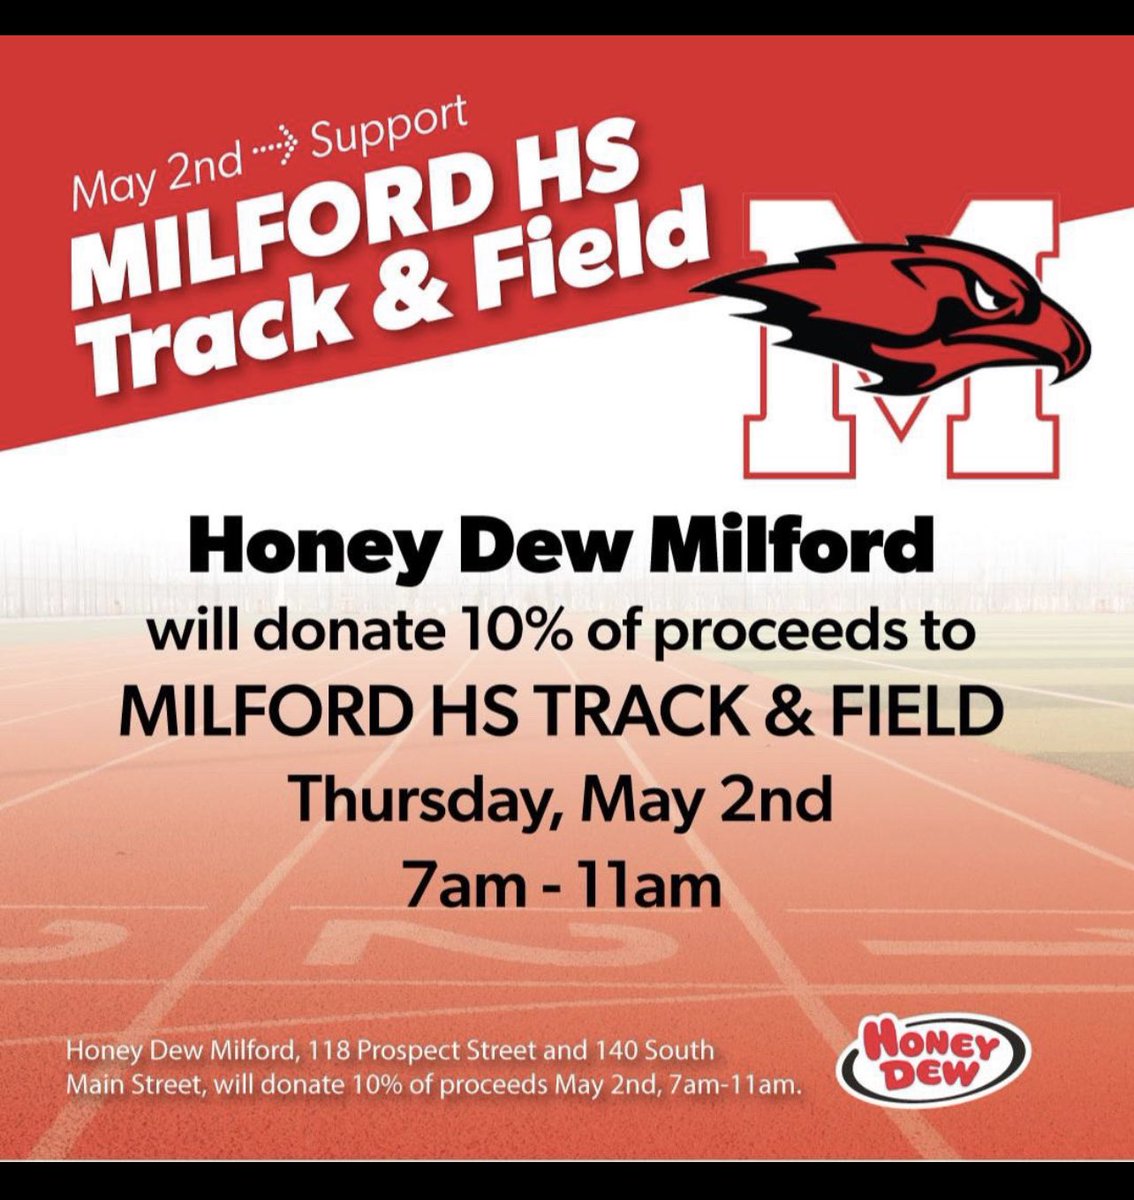 MHS T&F Fundraiser is around the corner!$!#%! HoneyDew Thurs 5-2 from 7am-11am, TIME 2 RAWK!🥳 @MilfordSchools @jcotlin @MHSBoosters2 @Chappy8611 @LauriePinto5